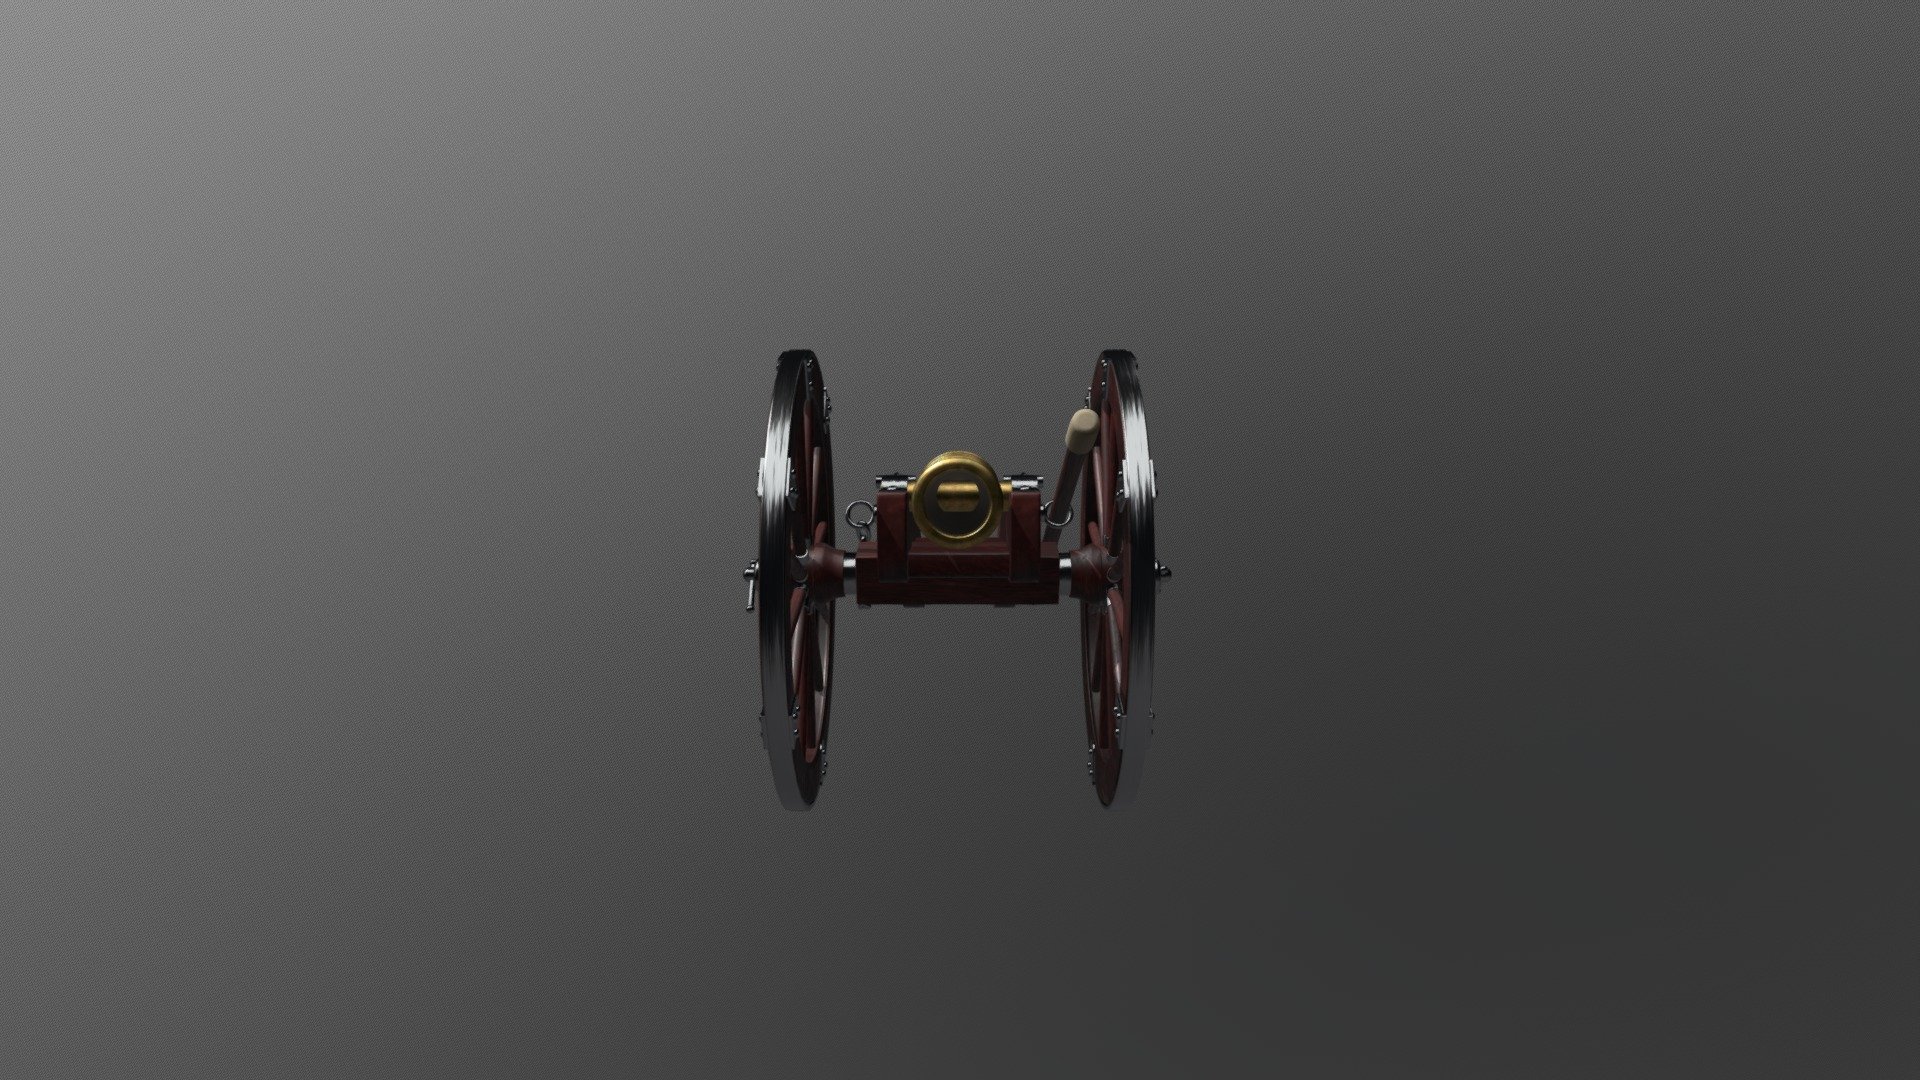 Louis XIV 18th Century French Cannon - WIP